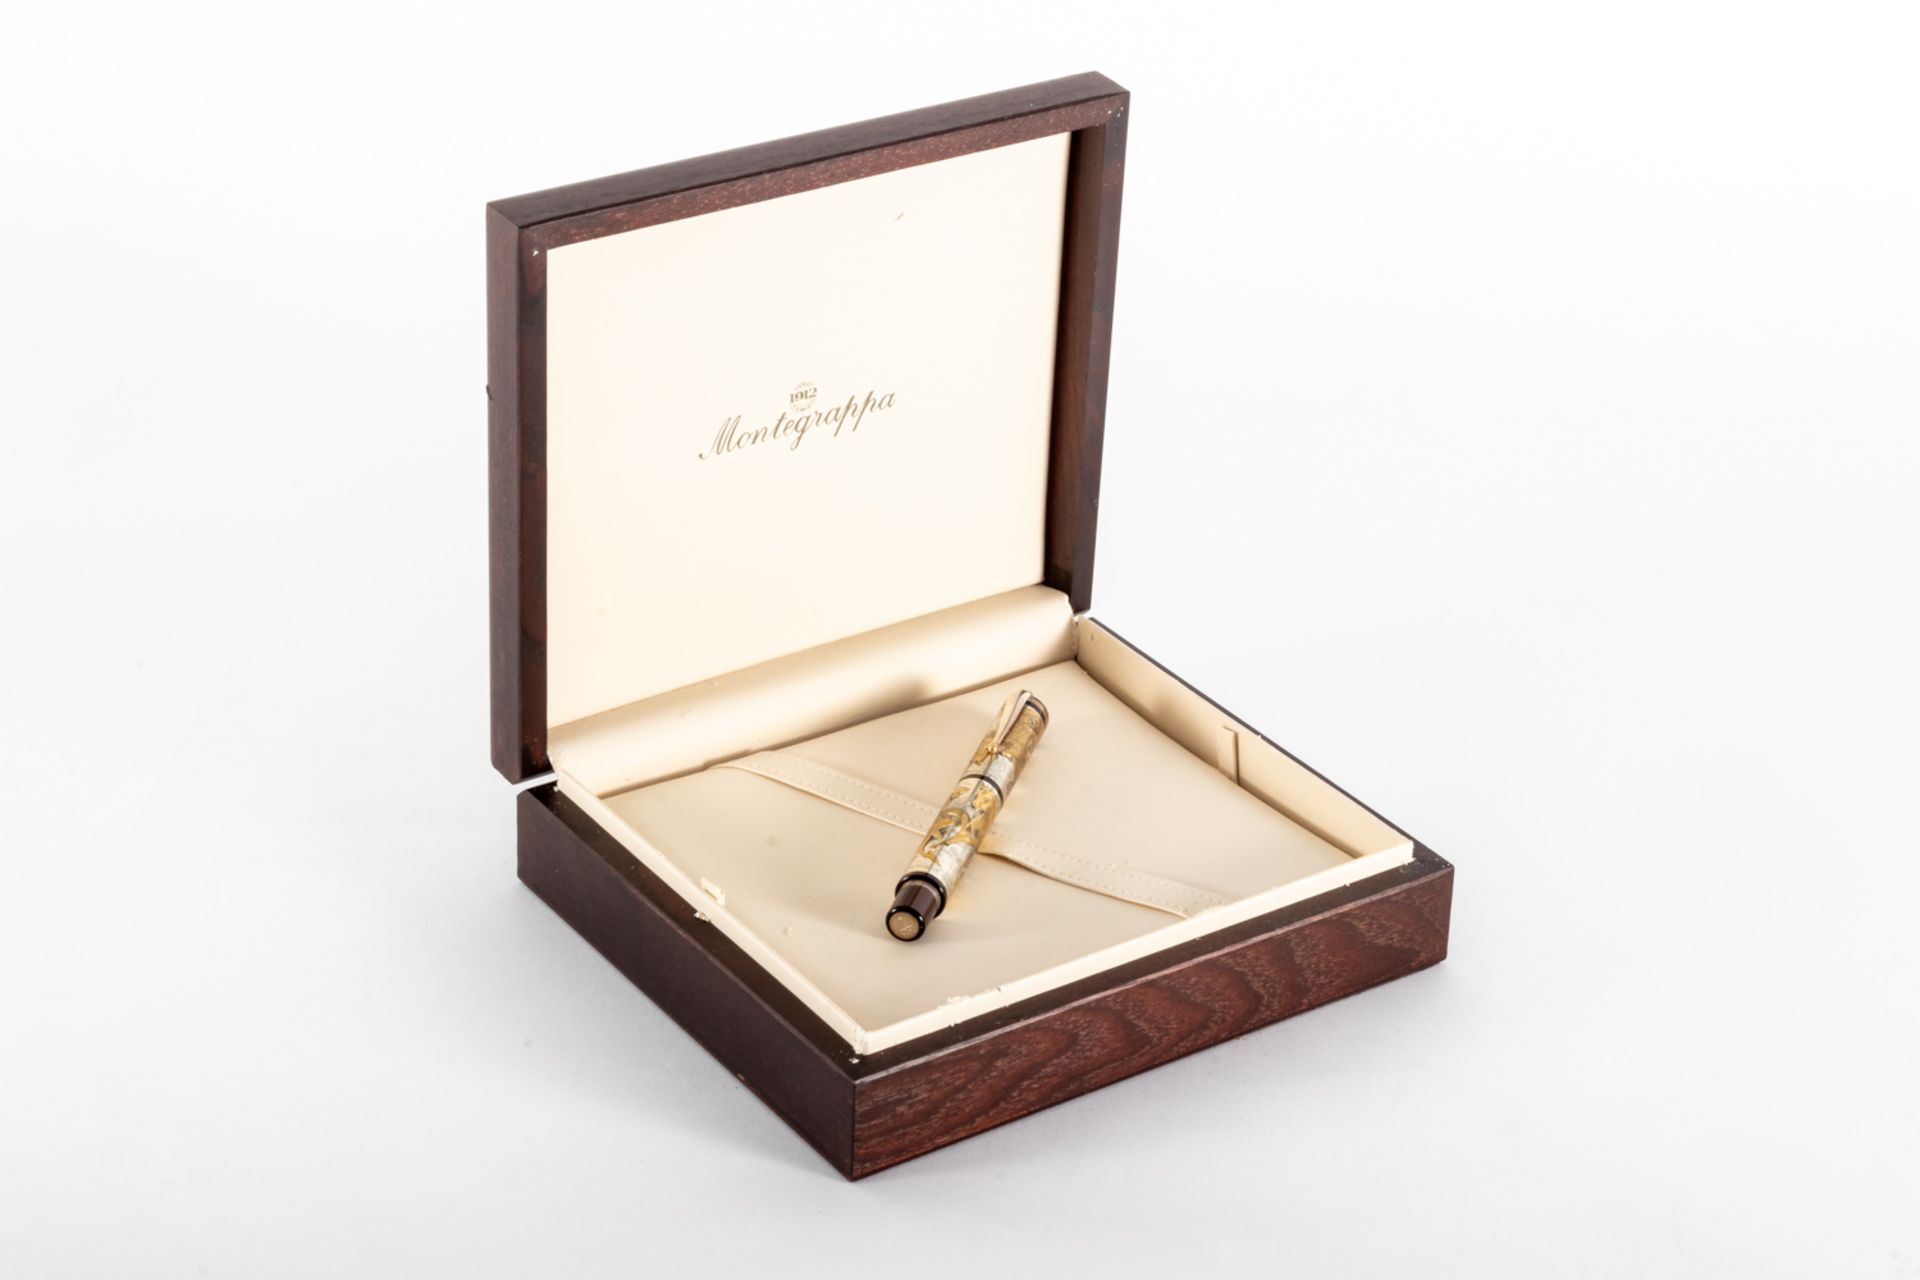 Montegrappa fountain pen "Animalia for Peace Park Foundation" collection, 2000. Limited edition numb